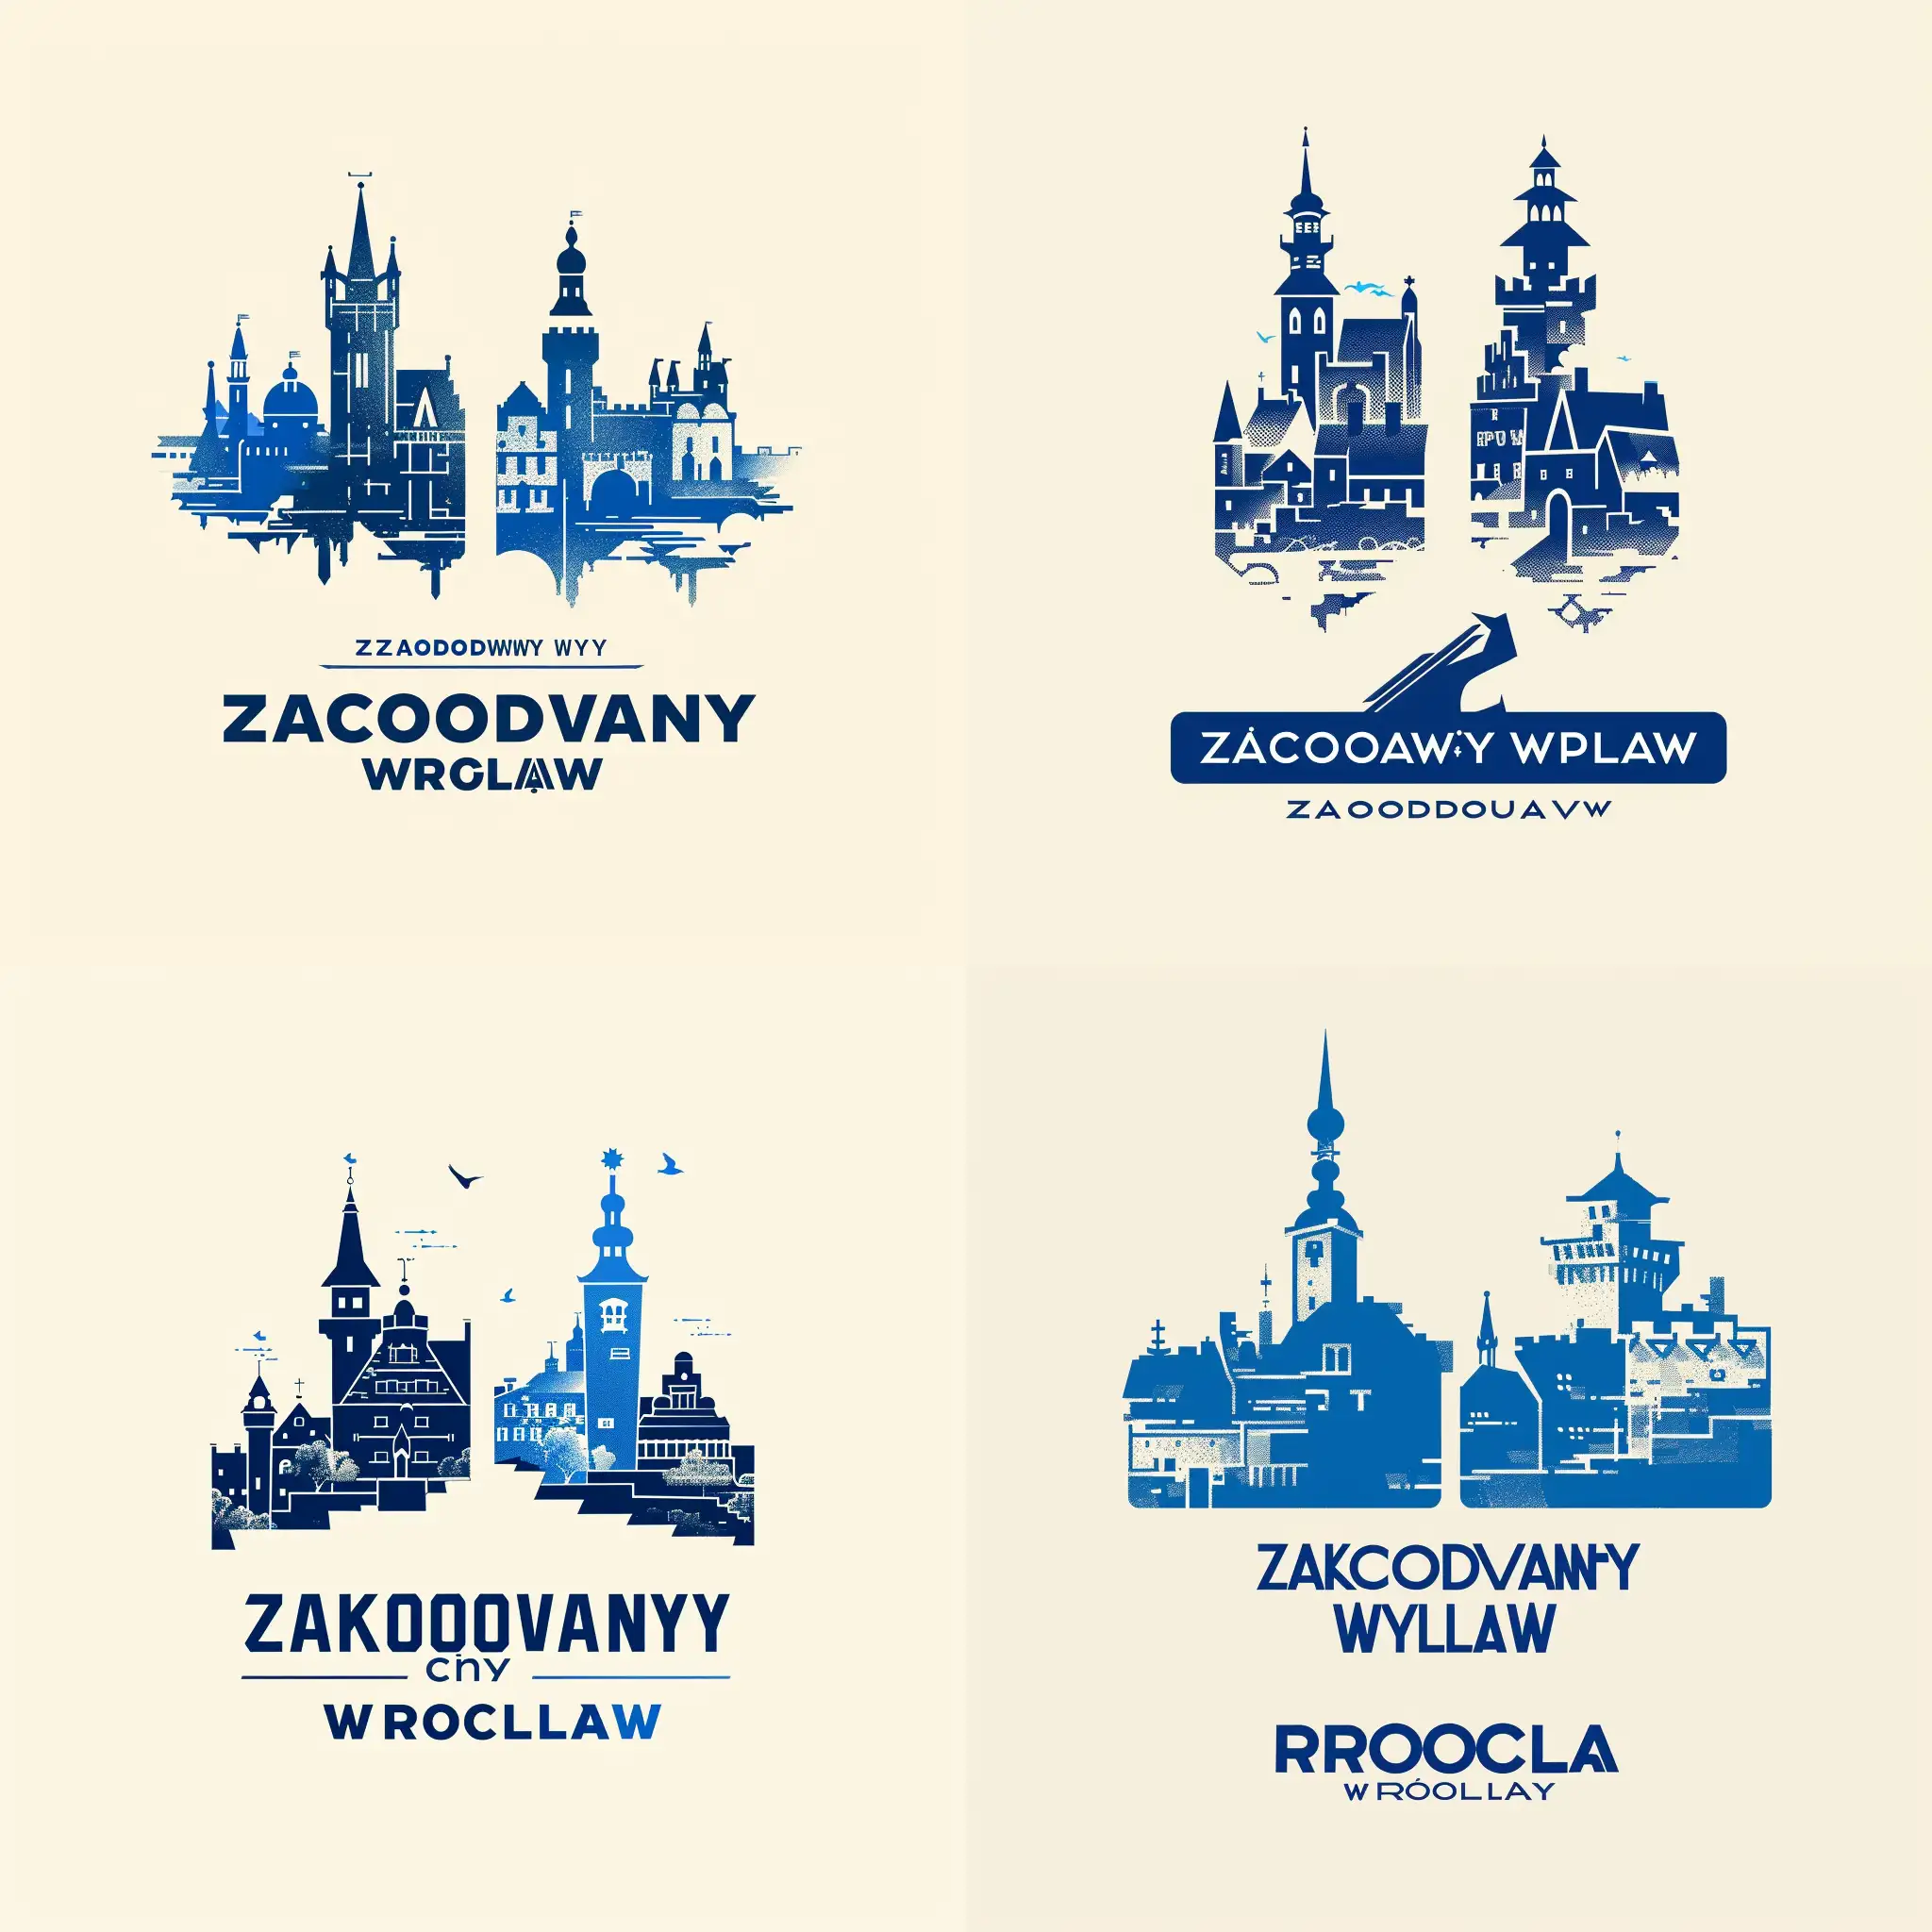 Create modern and simply logo of city game in Wrocław. Two colors. Blue and white. Famouse form Wrocław. Game card format.
Game title: "ZAKODOWANY WROCLAW"
